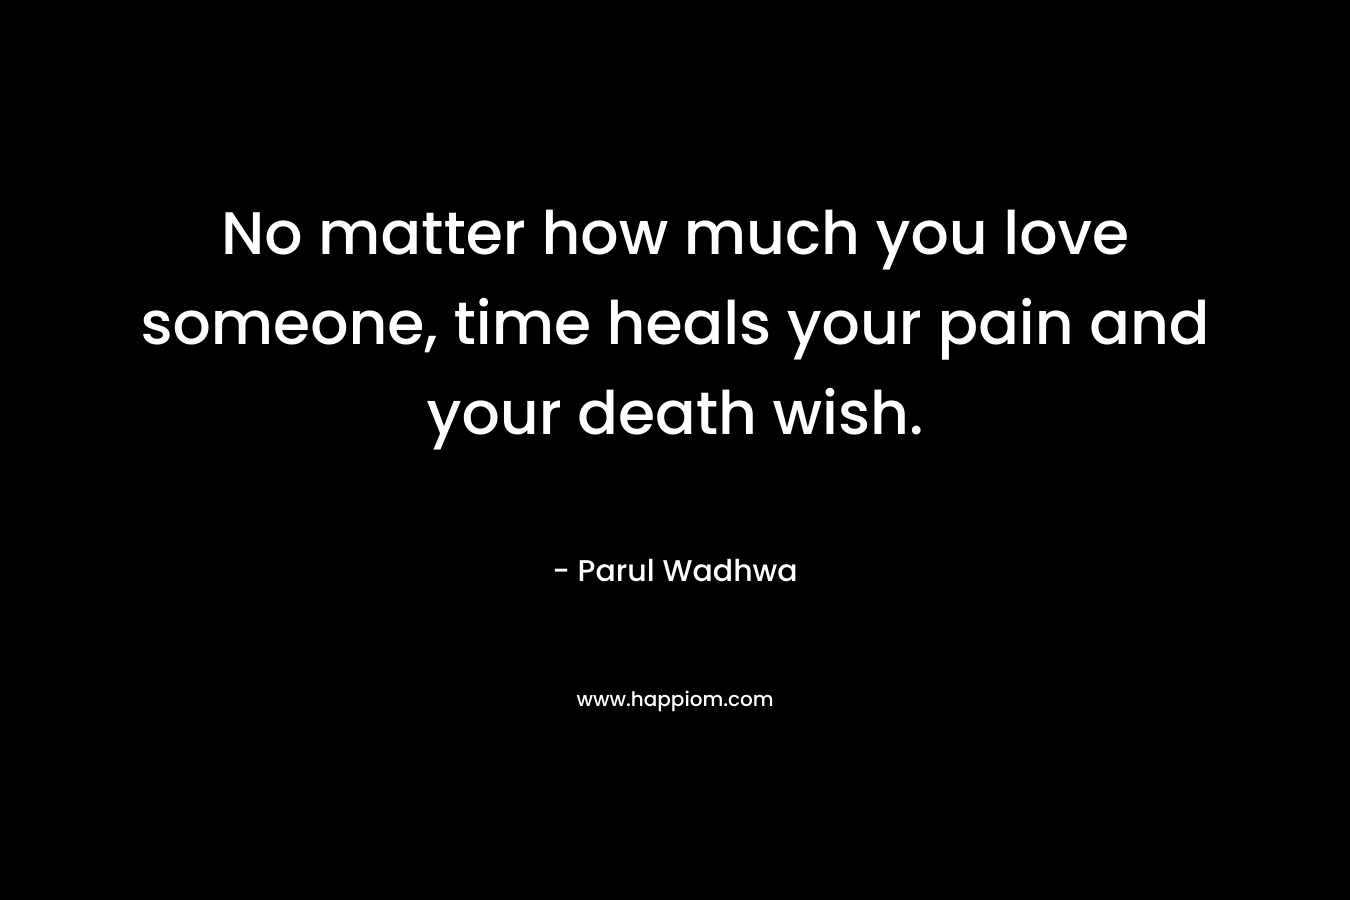 No matter how much you love someone, time heals your pain and your death wish.